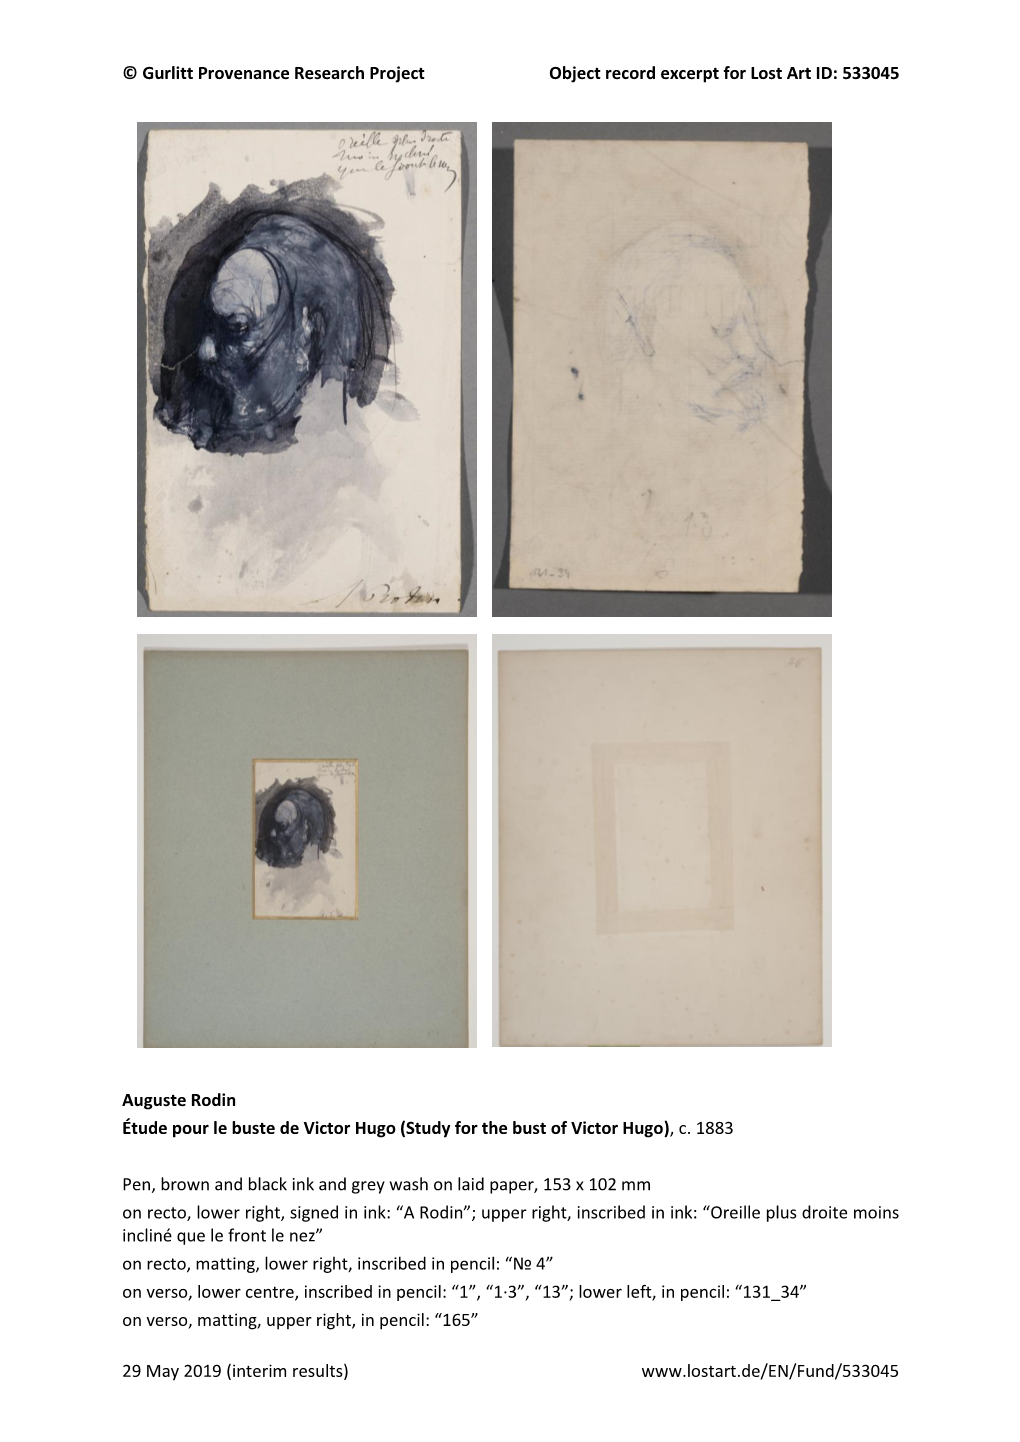 © Gurlitt Provenance Research Project Object Record Excerpt for Lost Art ID: 533045